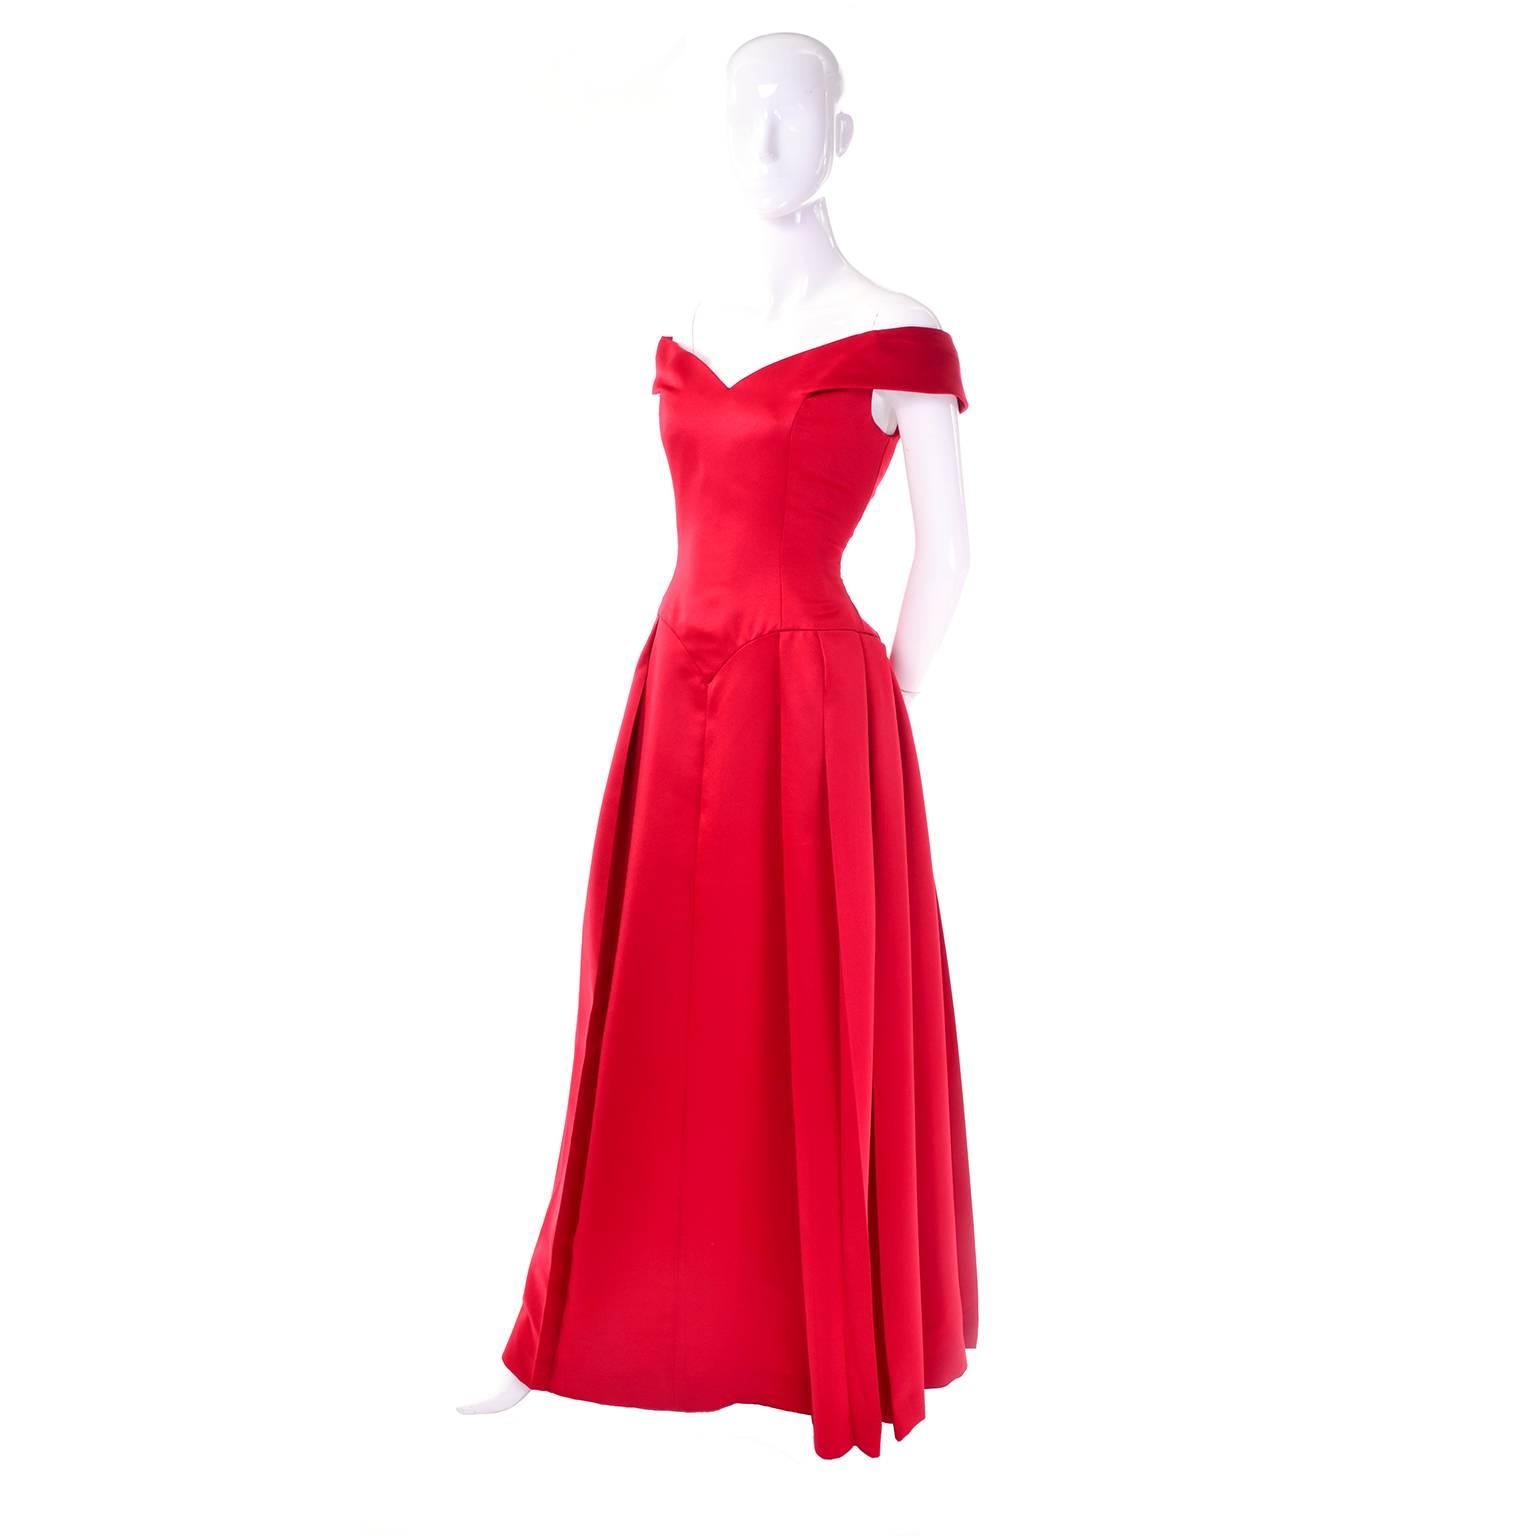 This is a beautiful Victor Costa Boutique red evening gown from I. Magnin in excellent condition. The full skirt of this beautiful ballgown is lined with a red netting, and the shoulders have an attached covered elastic inside to help them sit